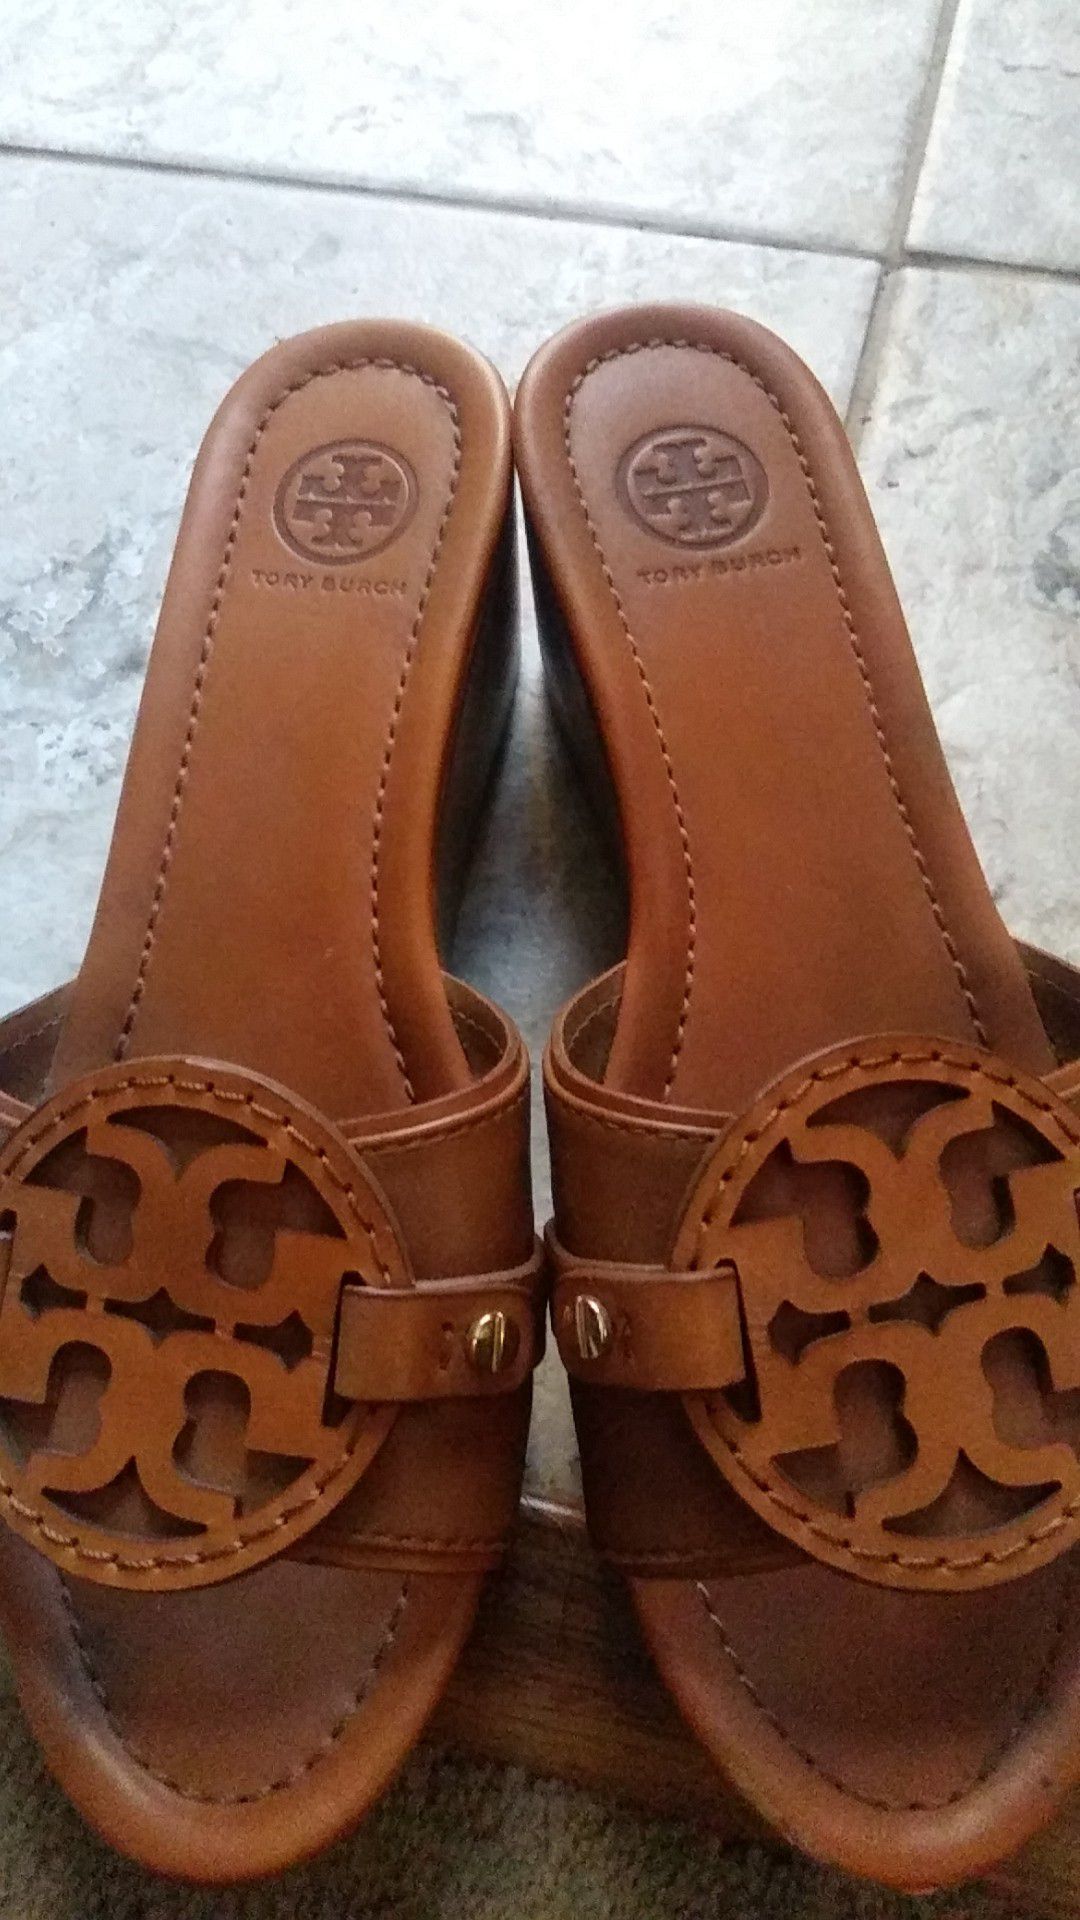 TORY BURCH WEDGE SANDLES SIZE 8 1/2